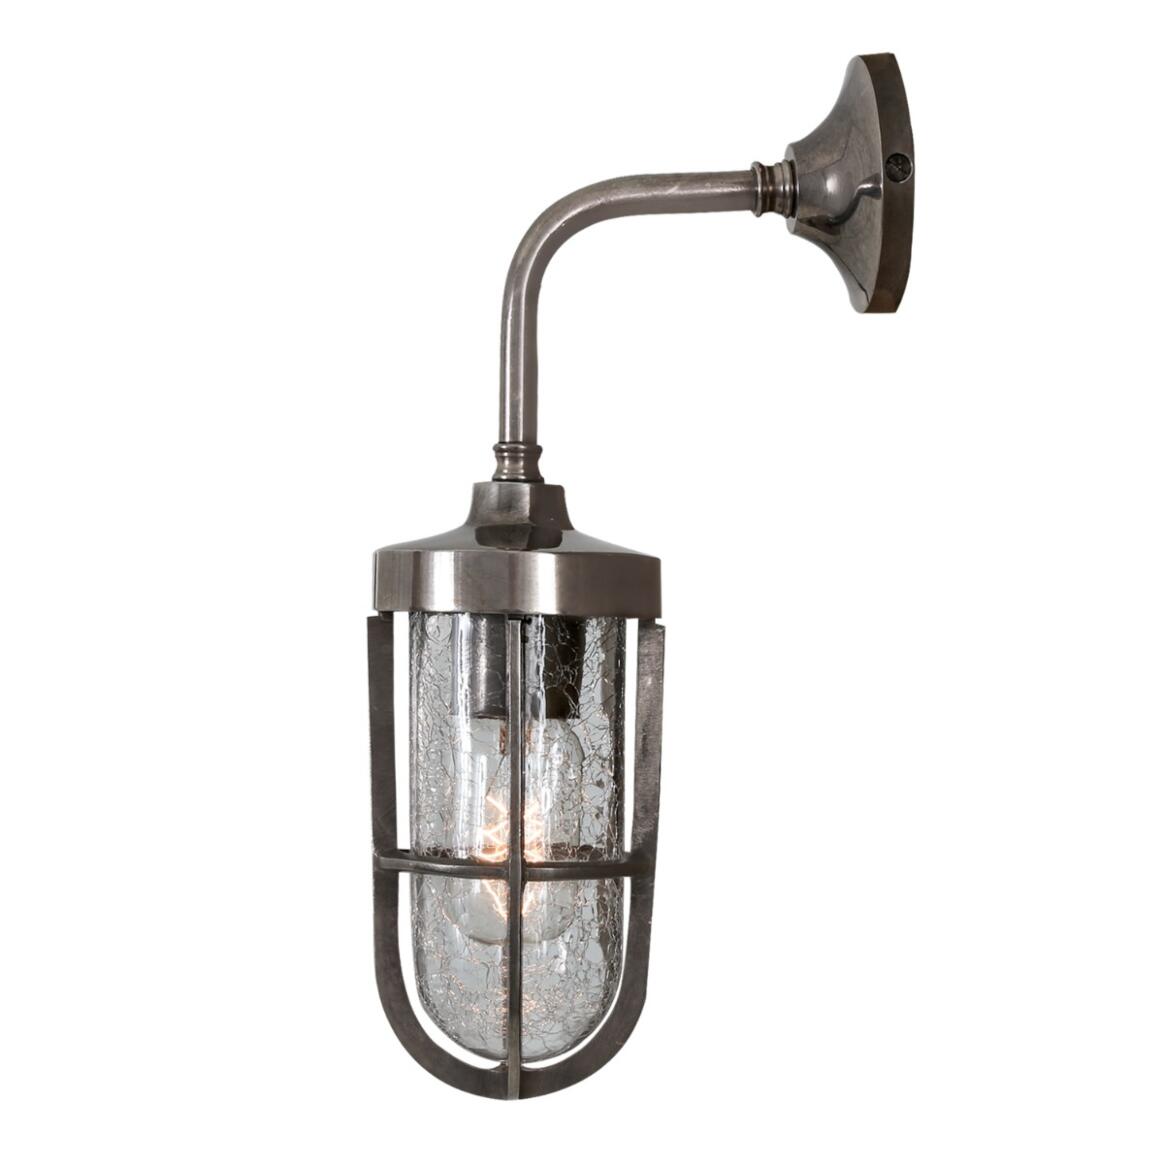 Carac Industrial Well Glass Wall Light IP65 main product image